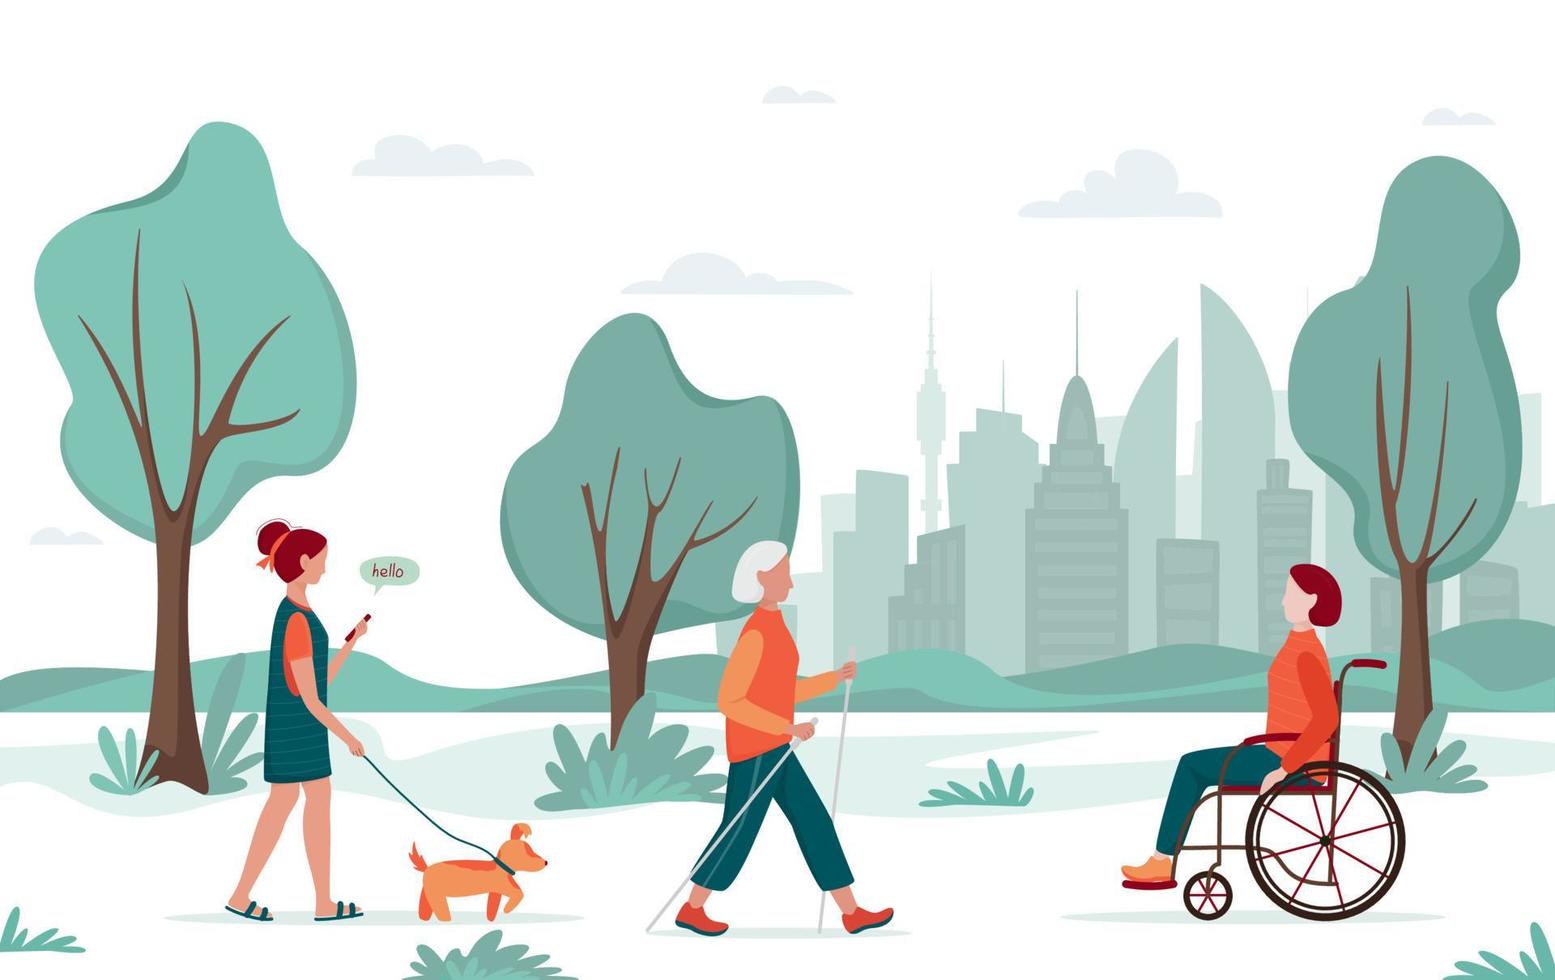 Outdoor activity. People walking in the city park. Girl with a dog, elderly woman with nordic walking sticks, woman in wheelchair. Urban recreation concept, diversity concept vector